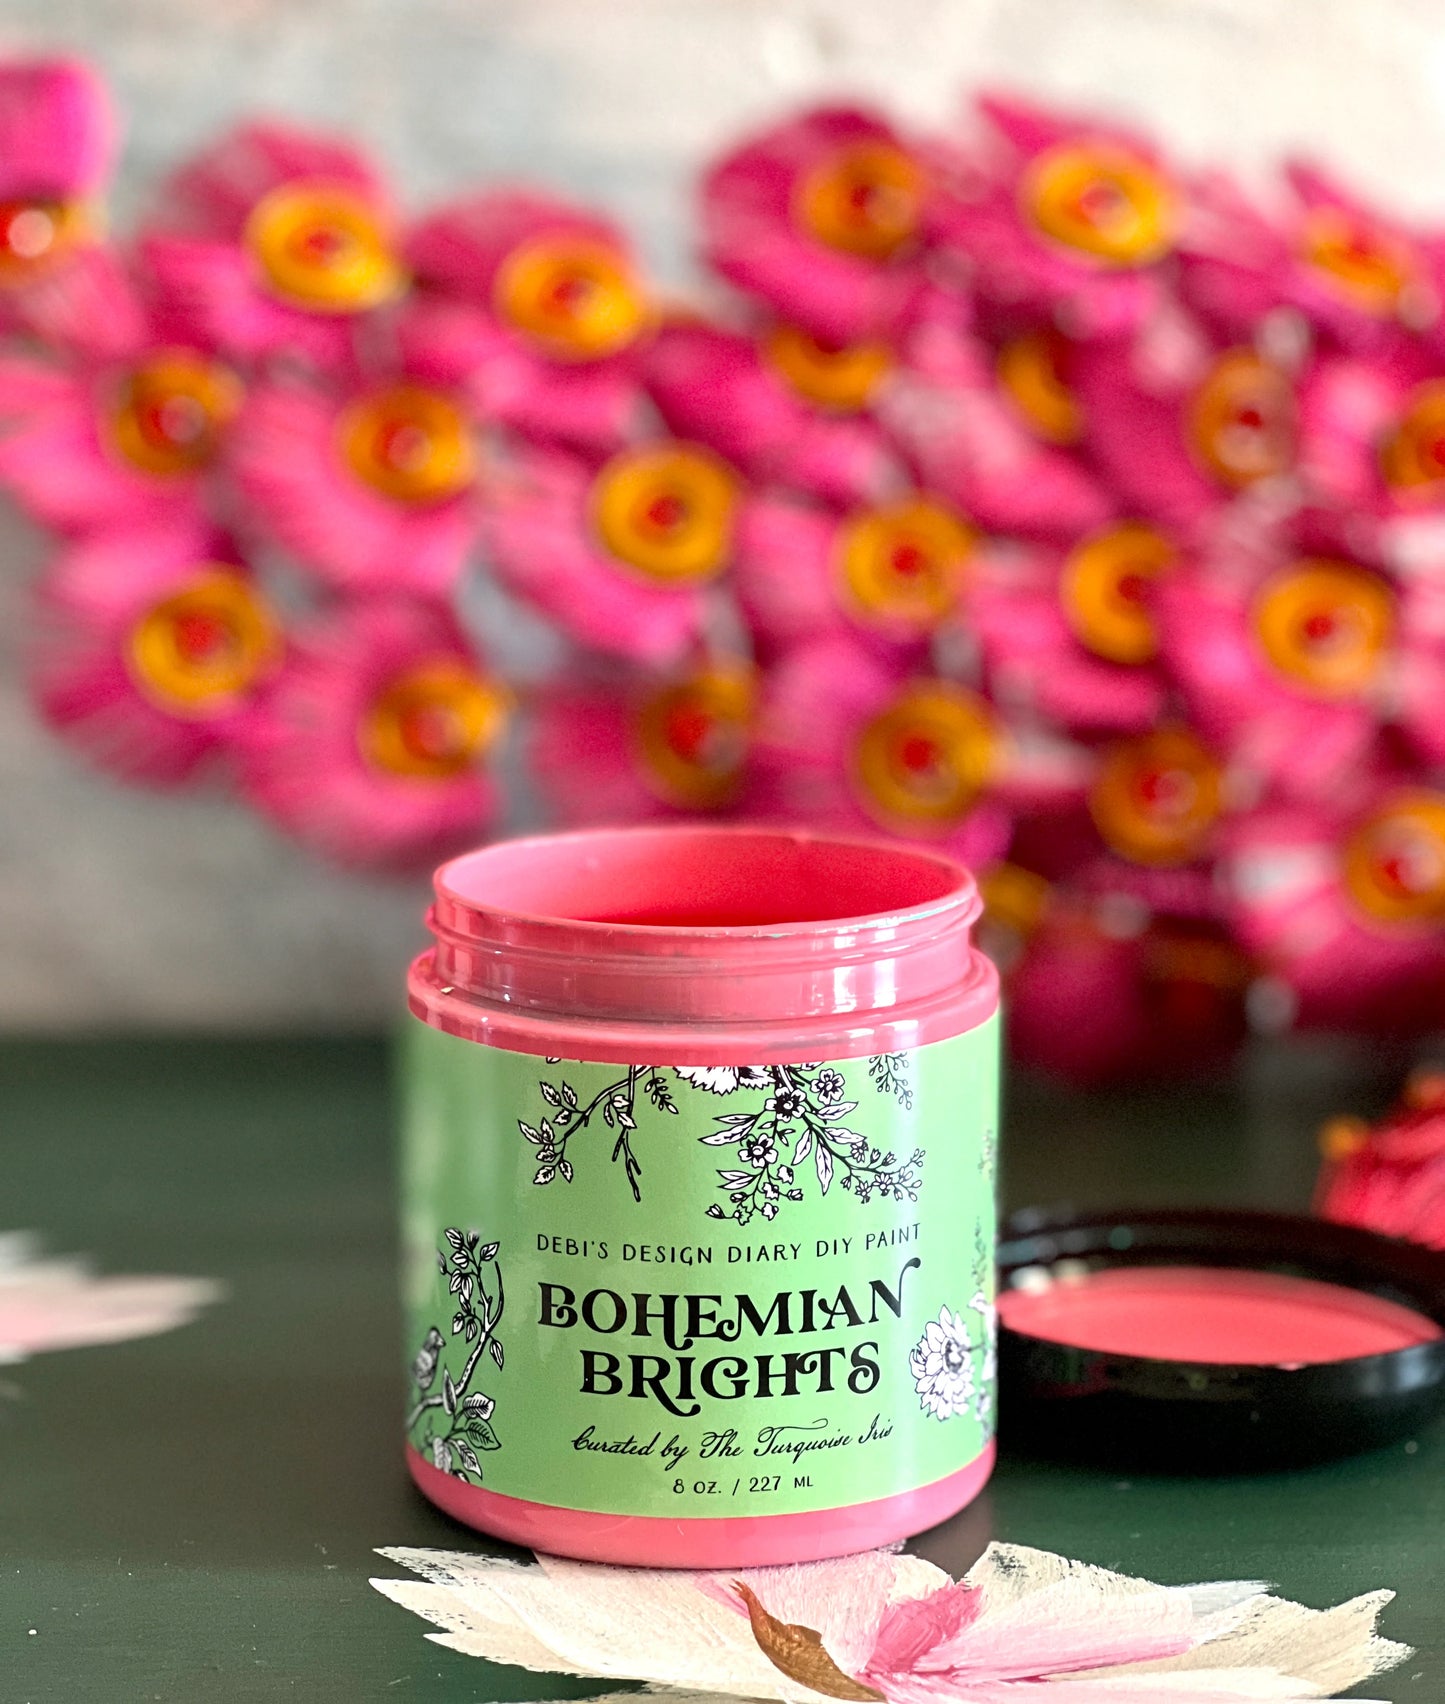 Bohemian Brights, Curated by The Turquoise Iris, 4 ounce, Choose your Favorite!